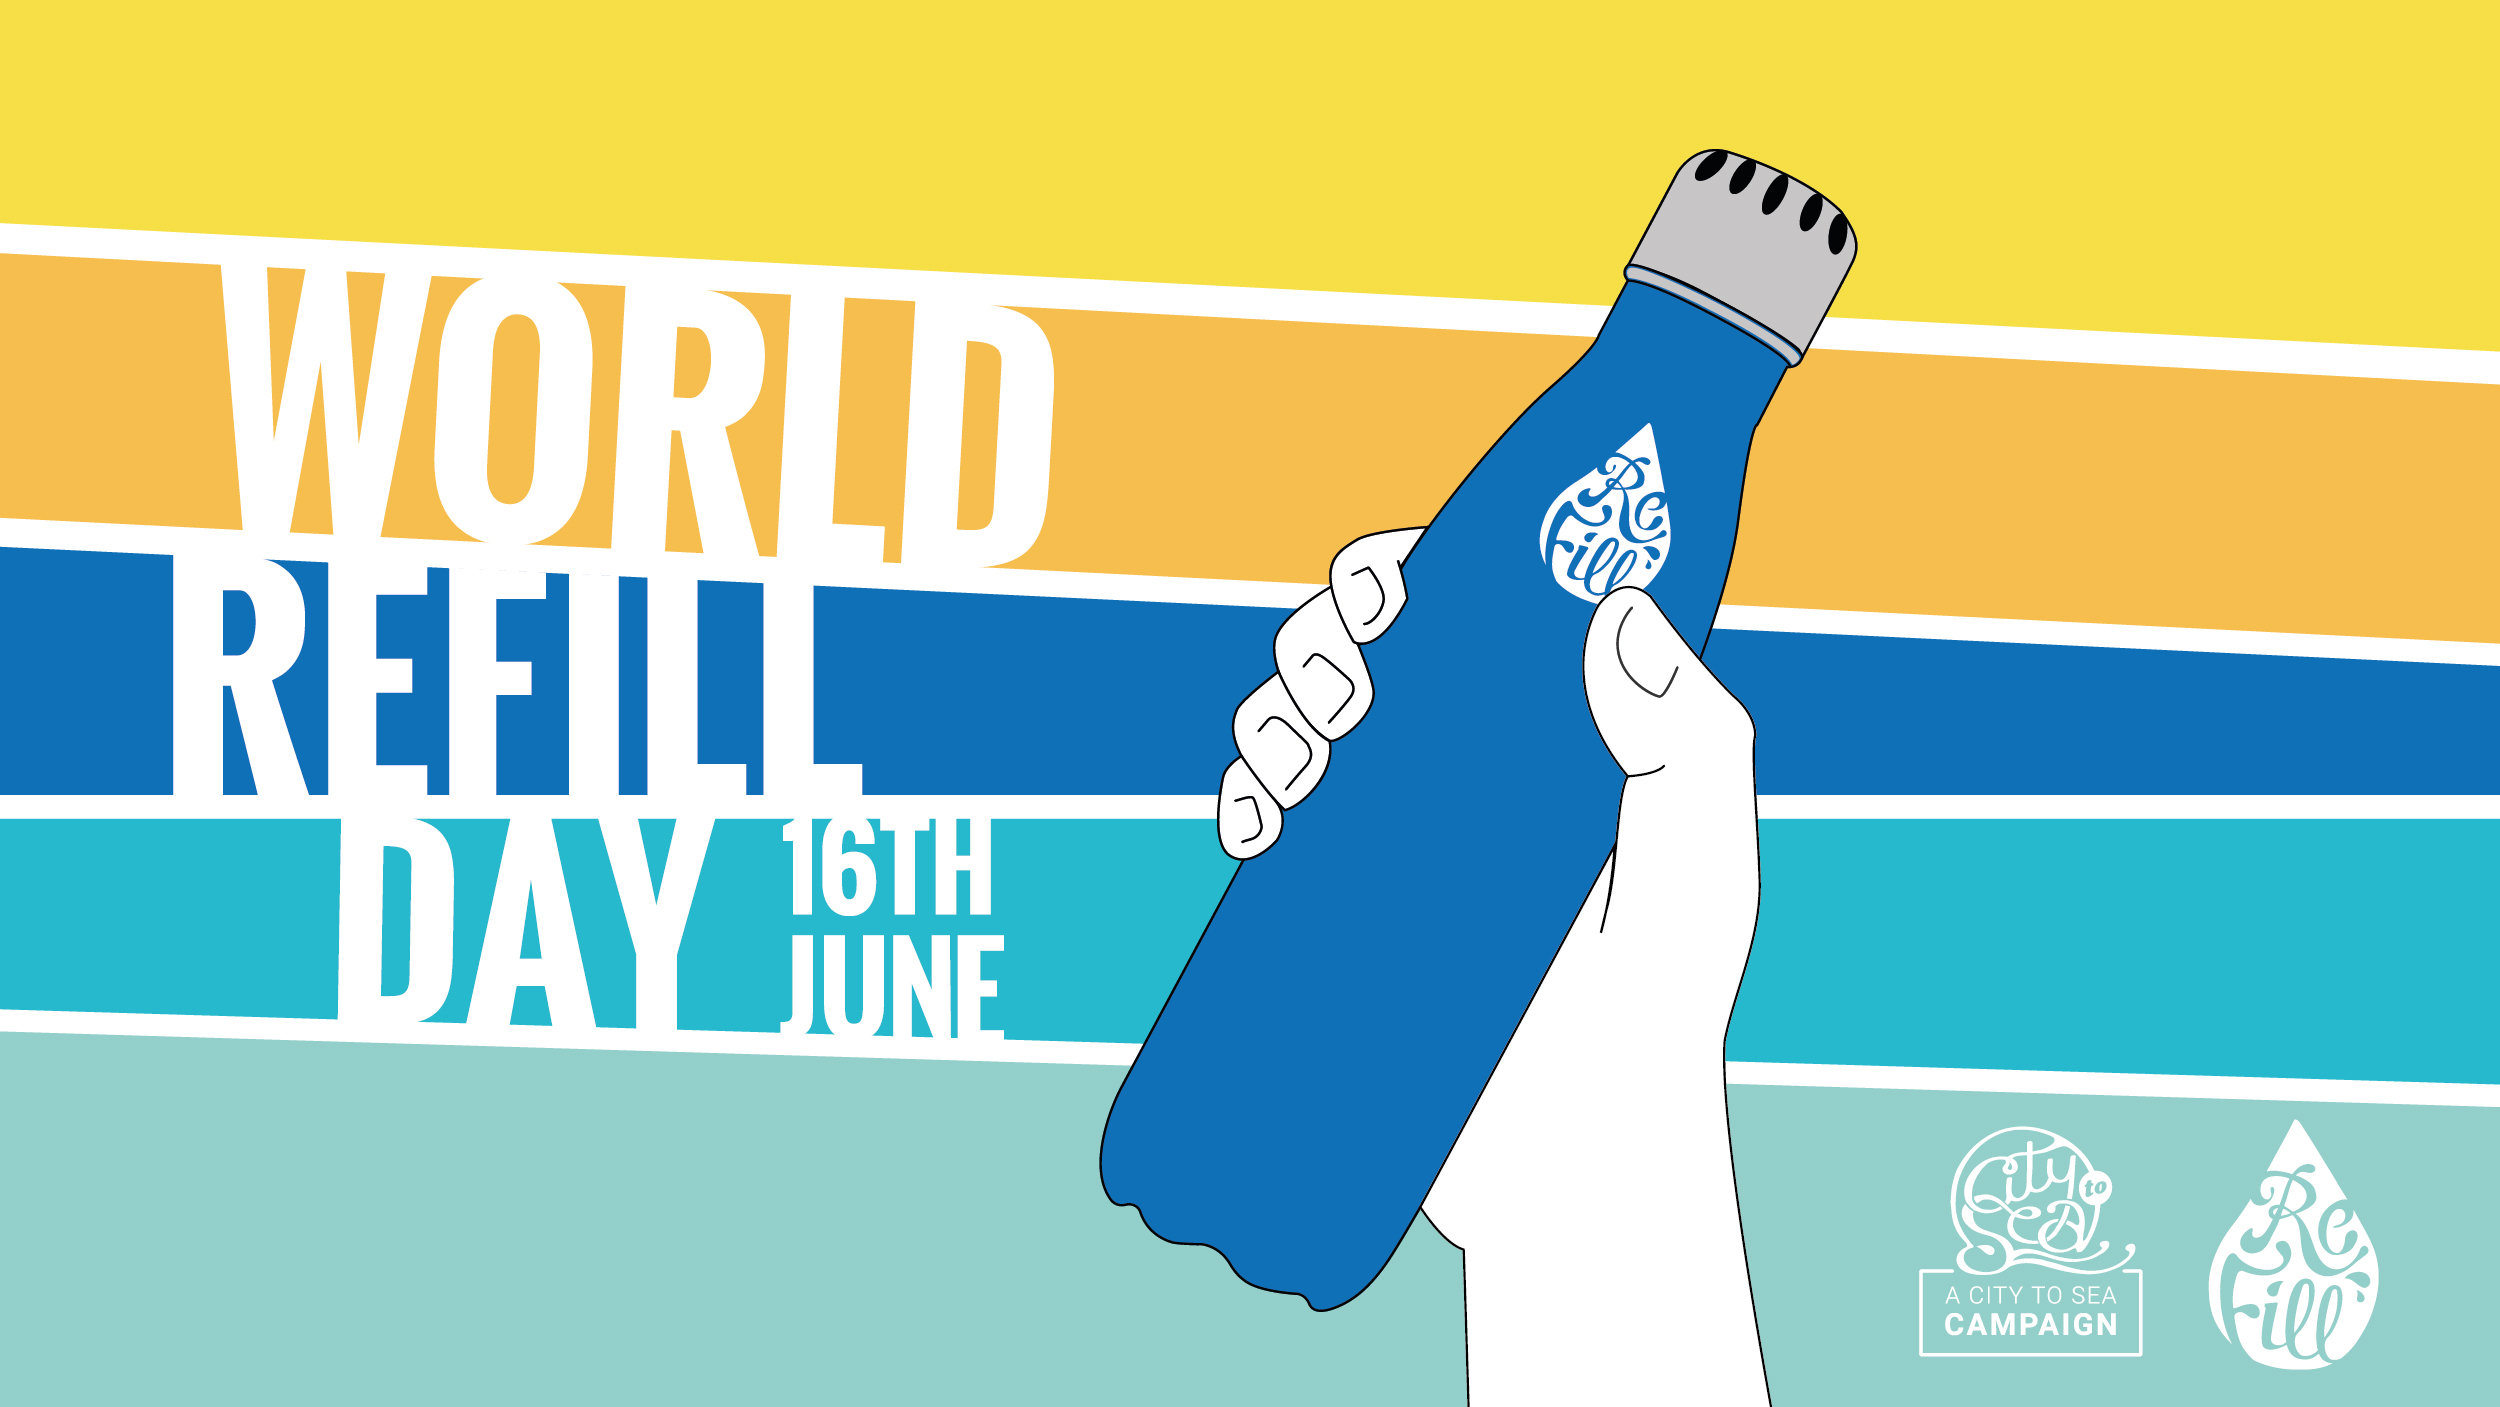 Choose to reuse this World Refill Day! Staff and Student News